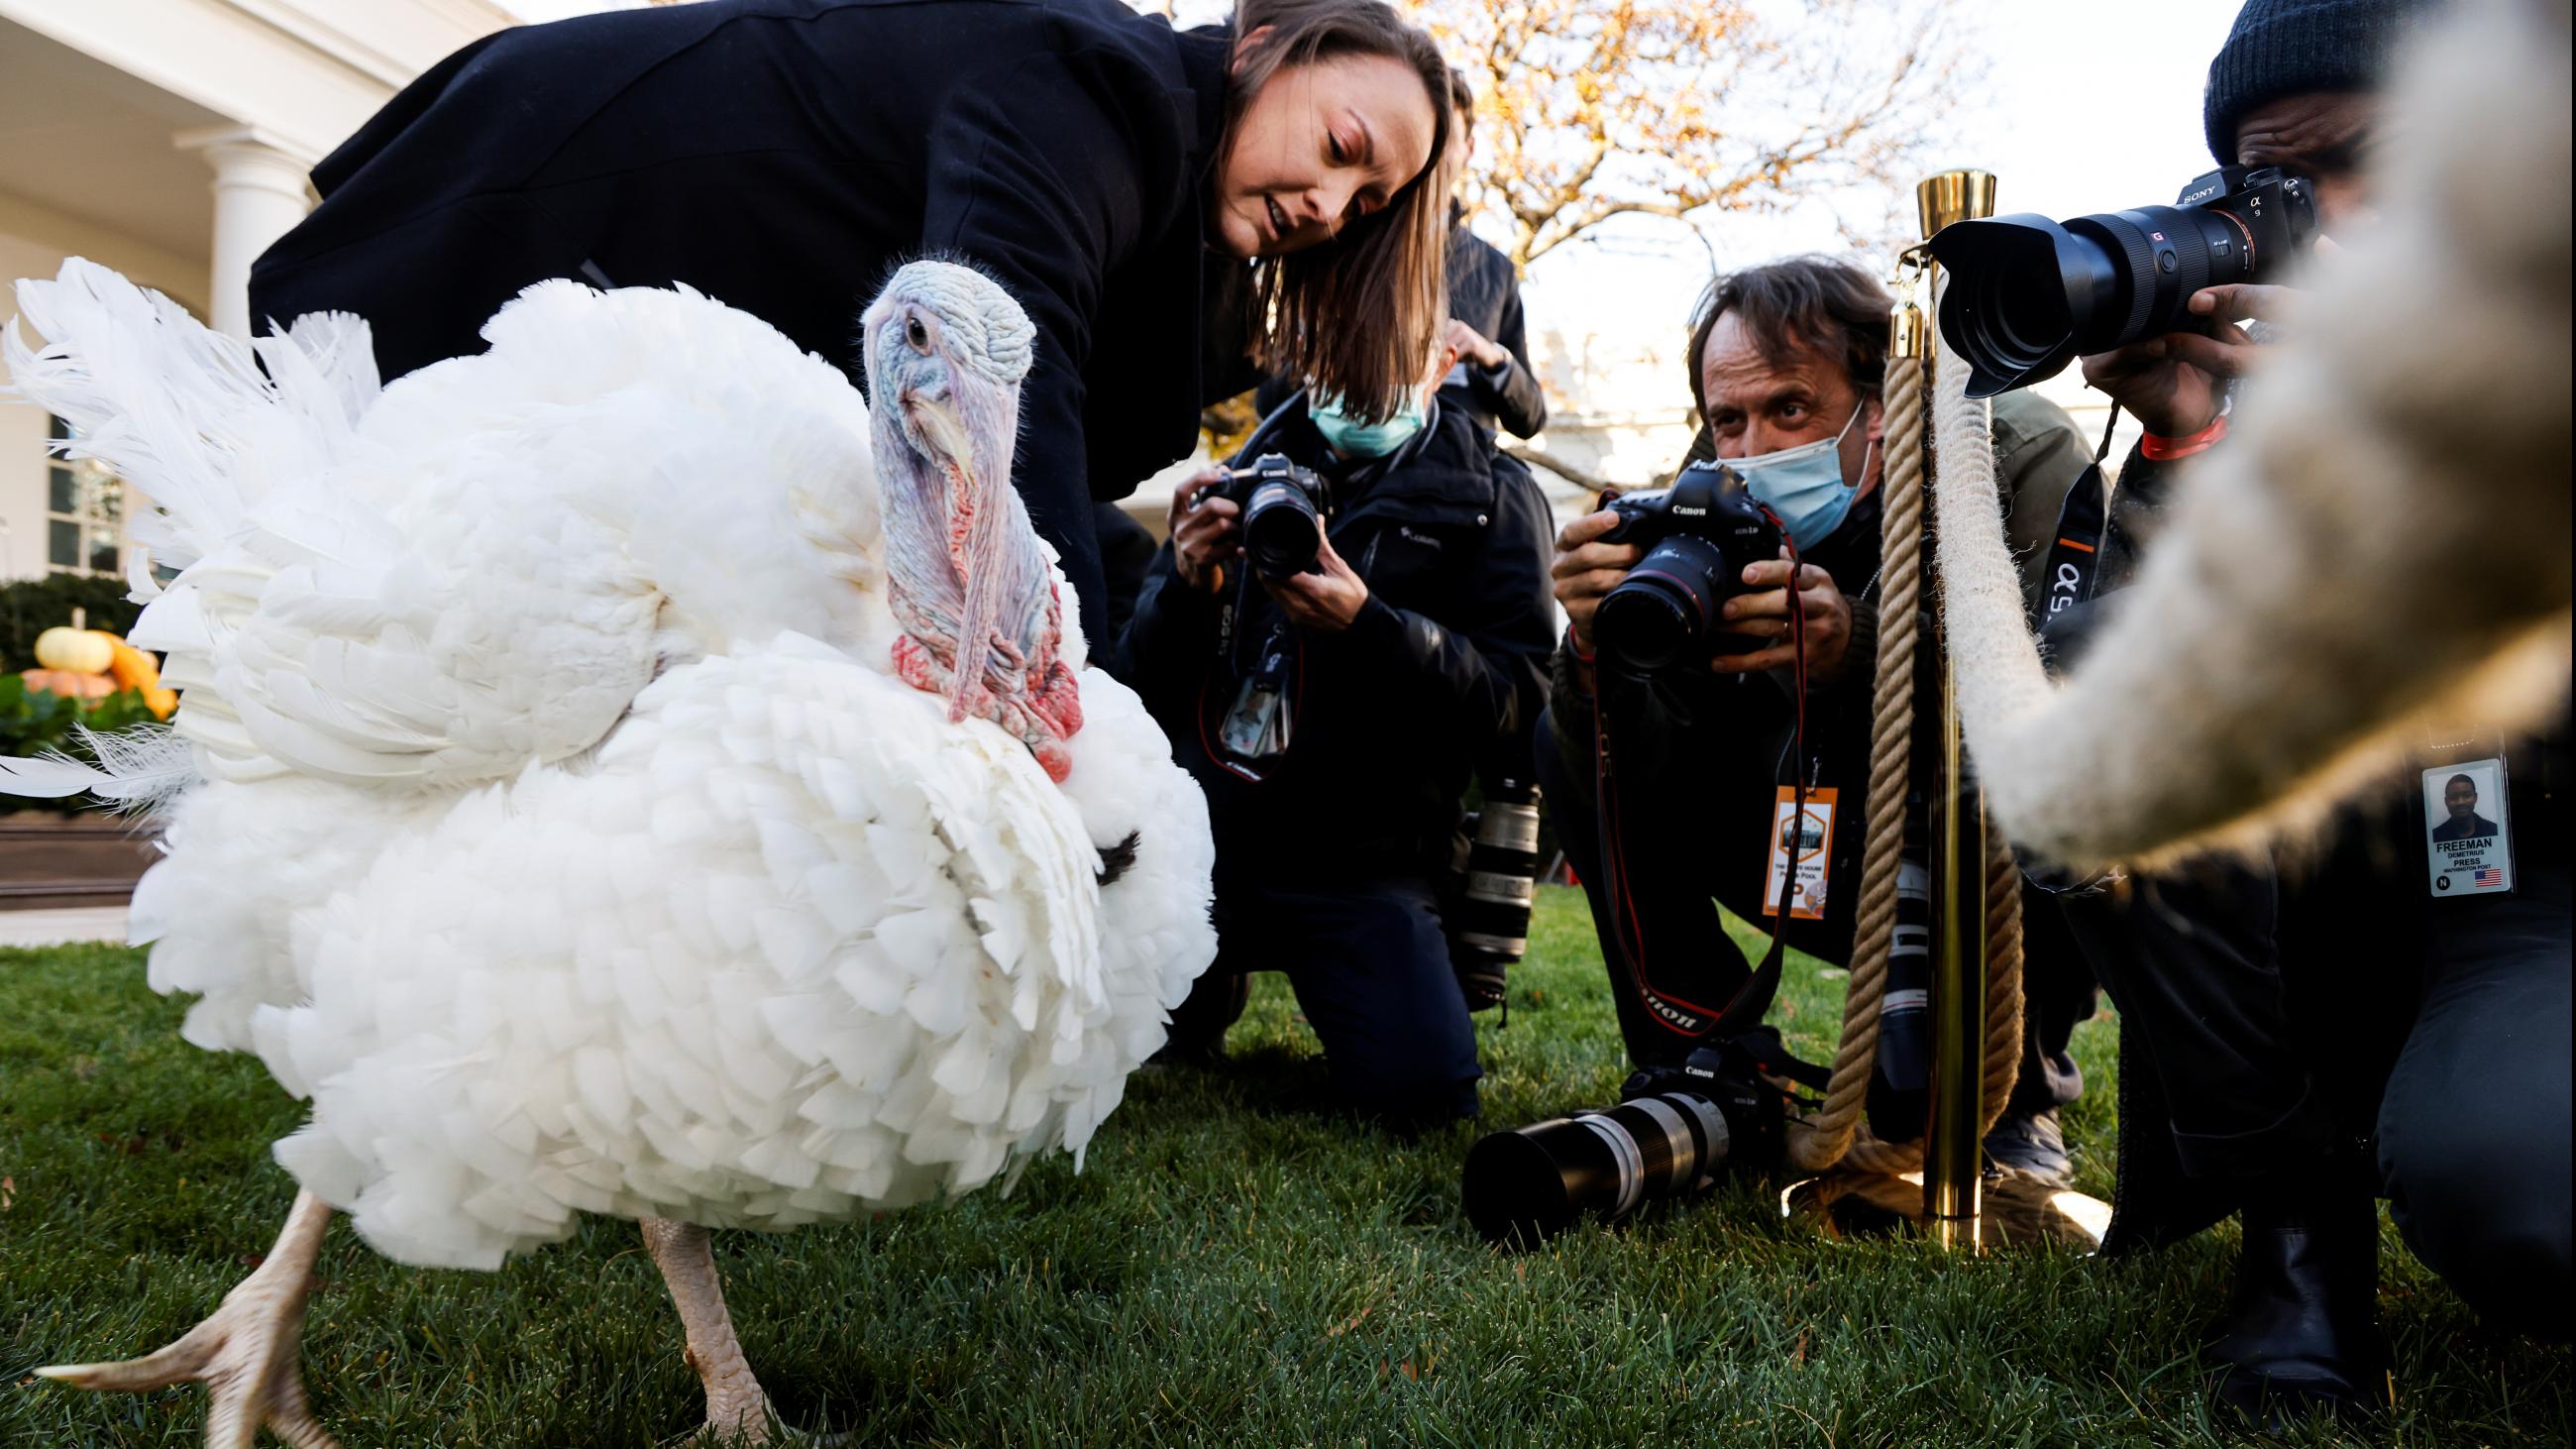 The national Thanksgiving turkey, Peanut Butter, is photographed in the Rose Garden as U.S. President Joe Biden hosts the seventy-fourth National Thanksgiving Turkey Presentation at the White House in Washington, DC, on November 19, 2021.